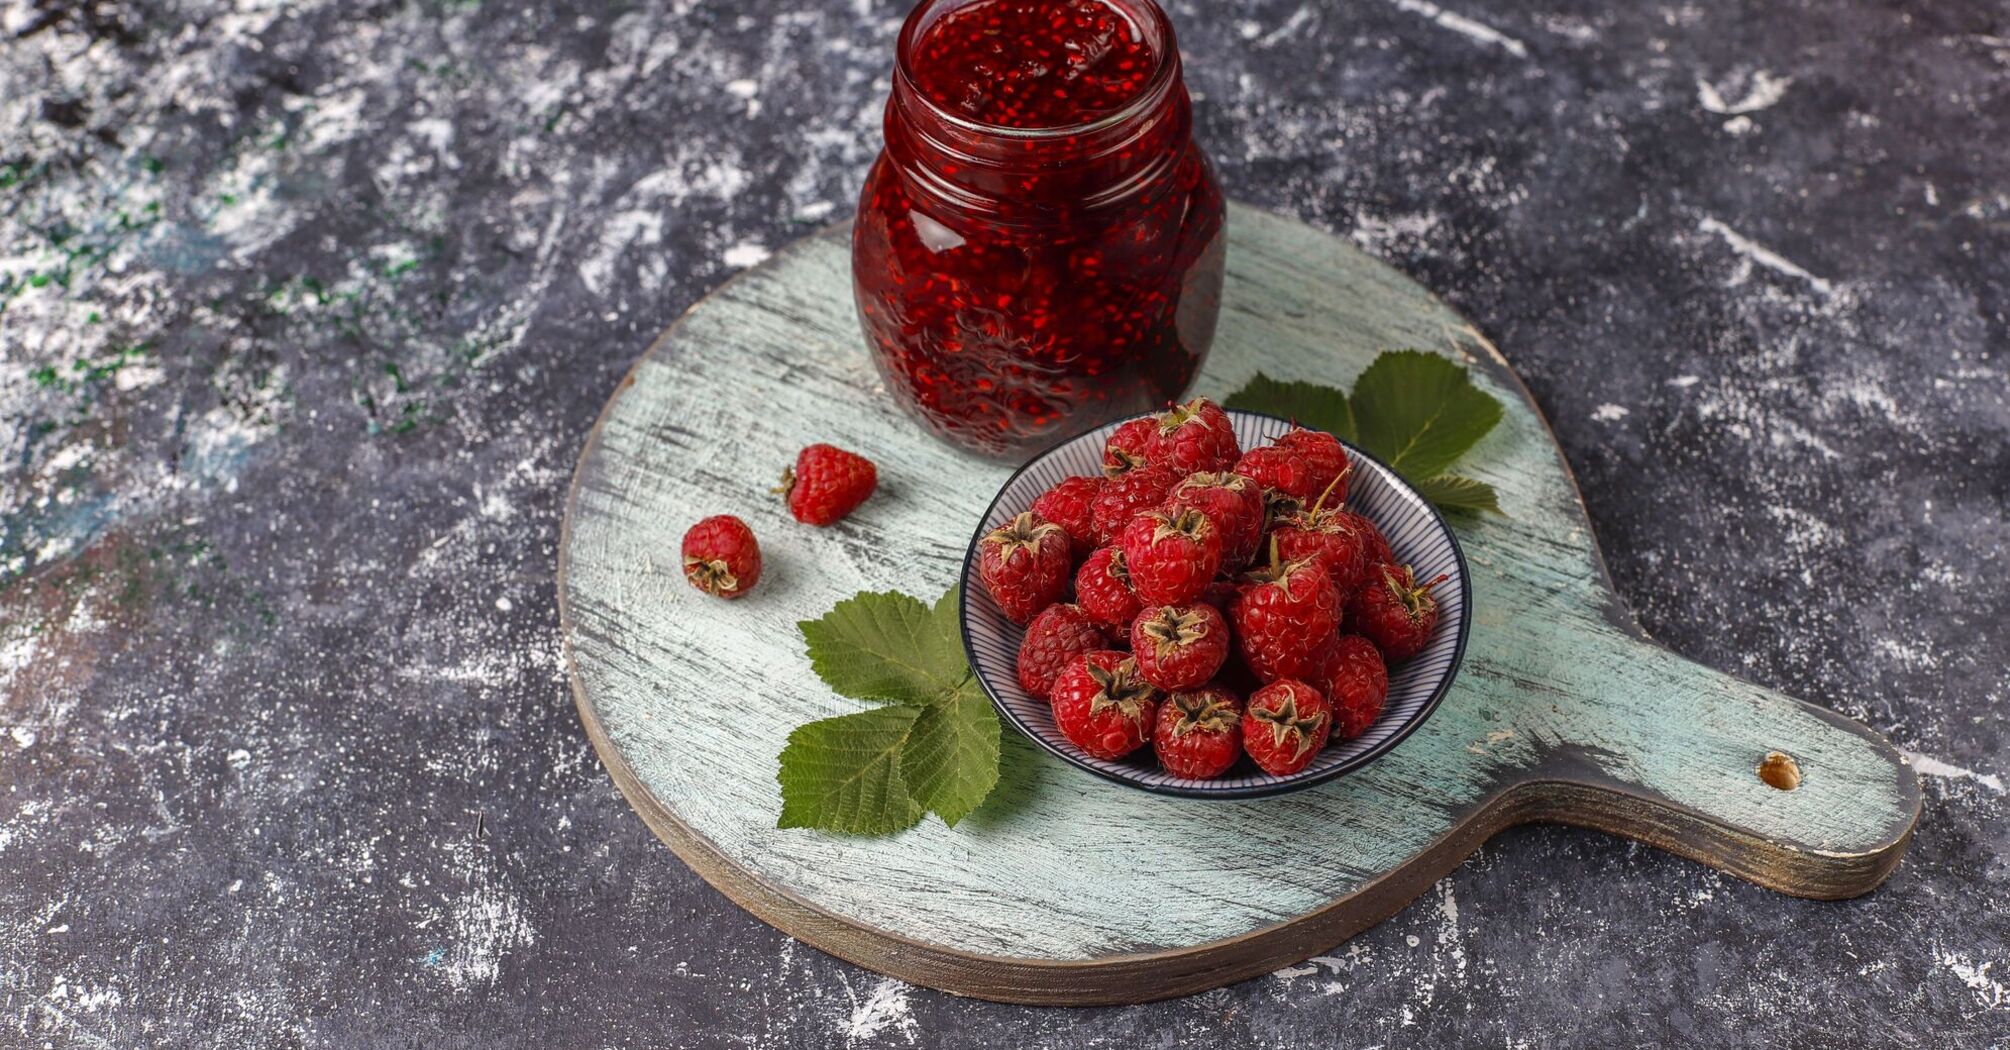 Strawberry jam: how to make it thick and healthy